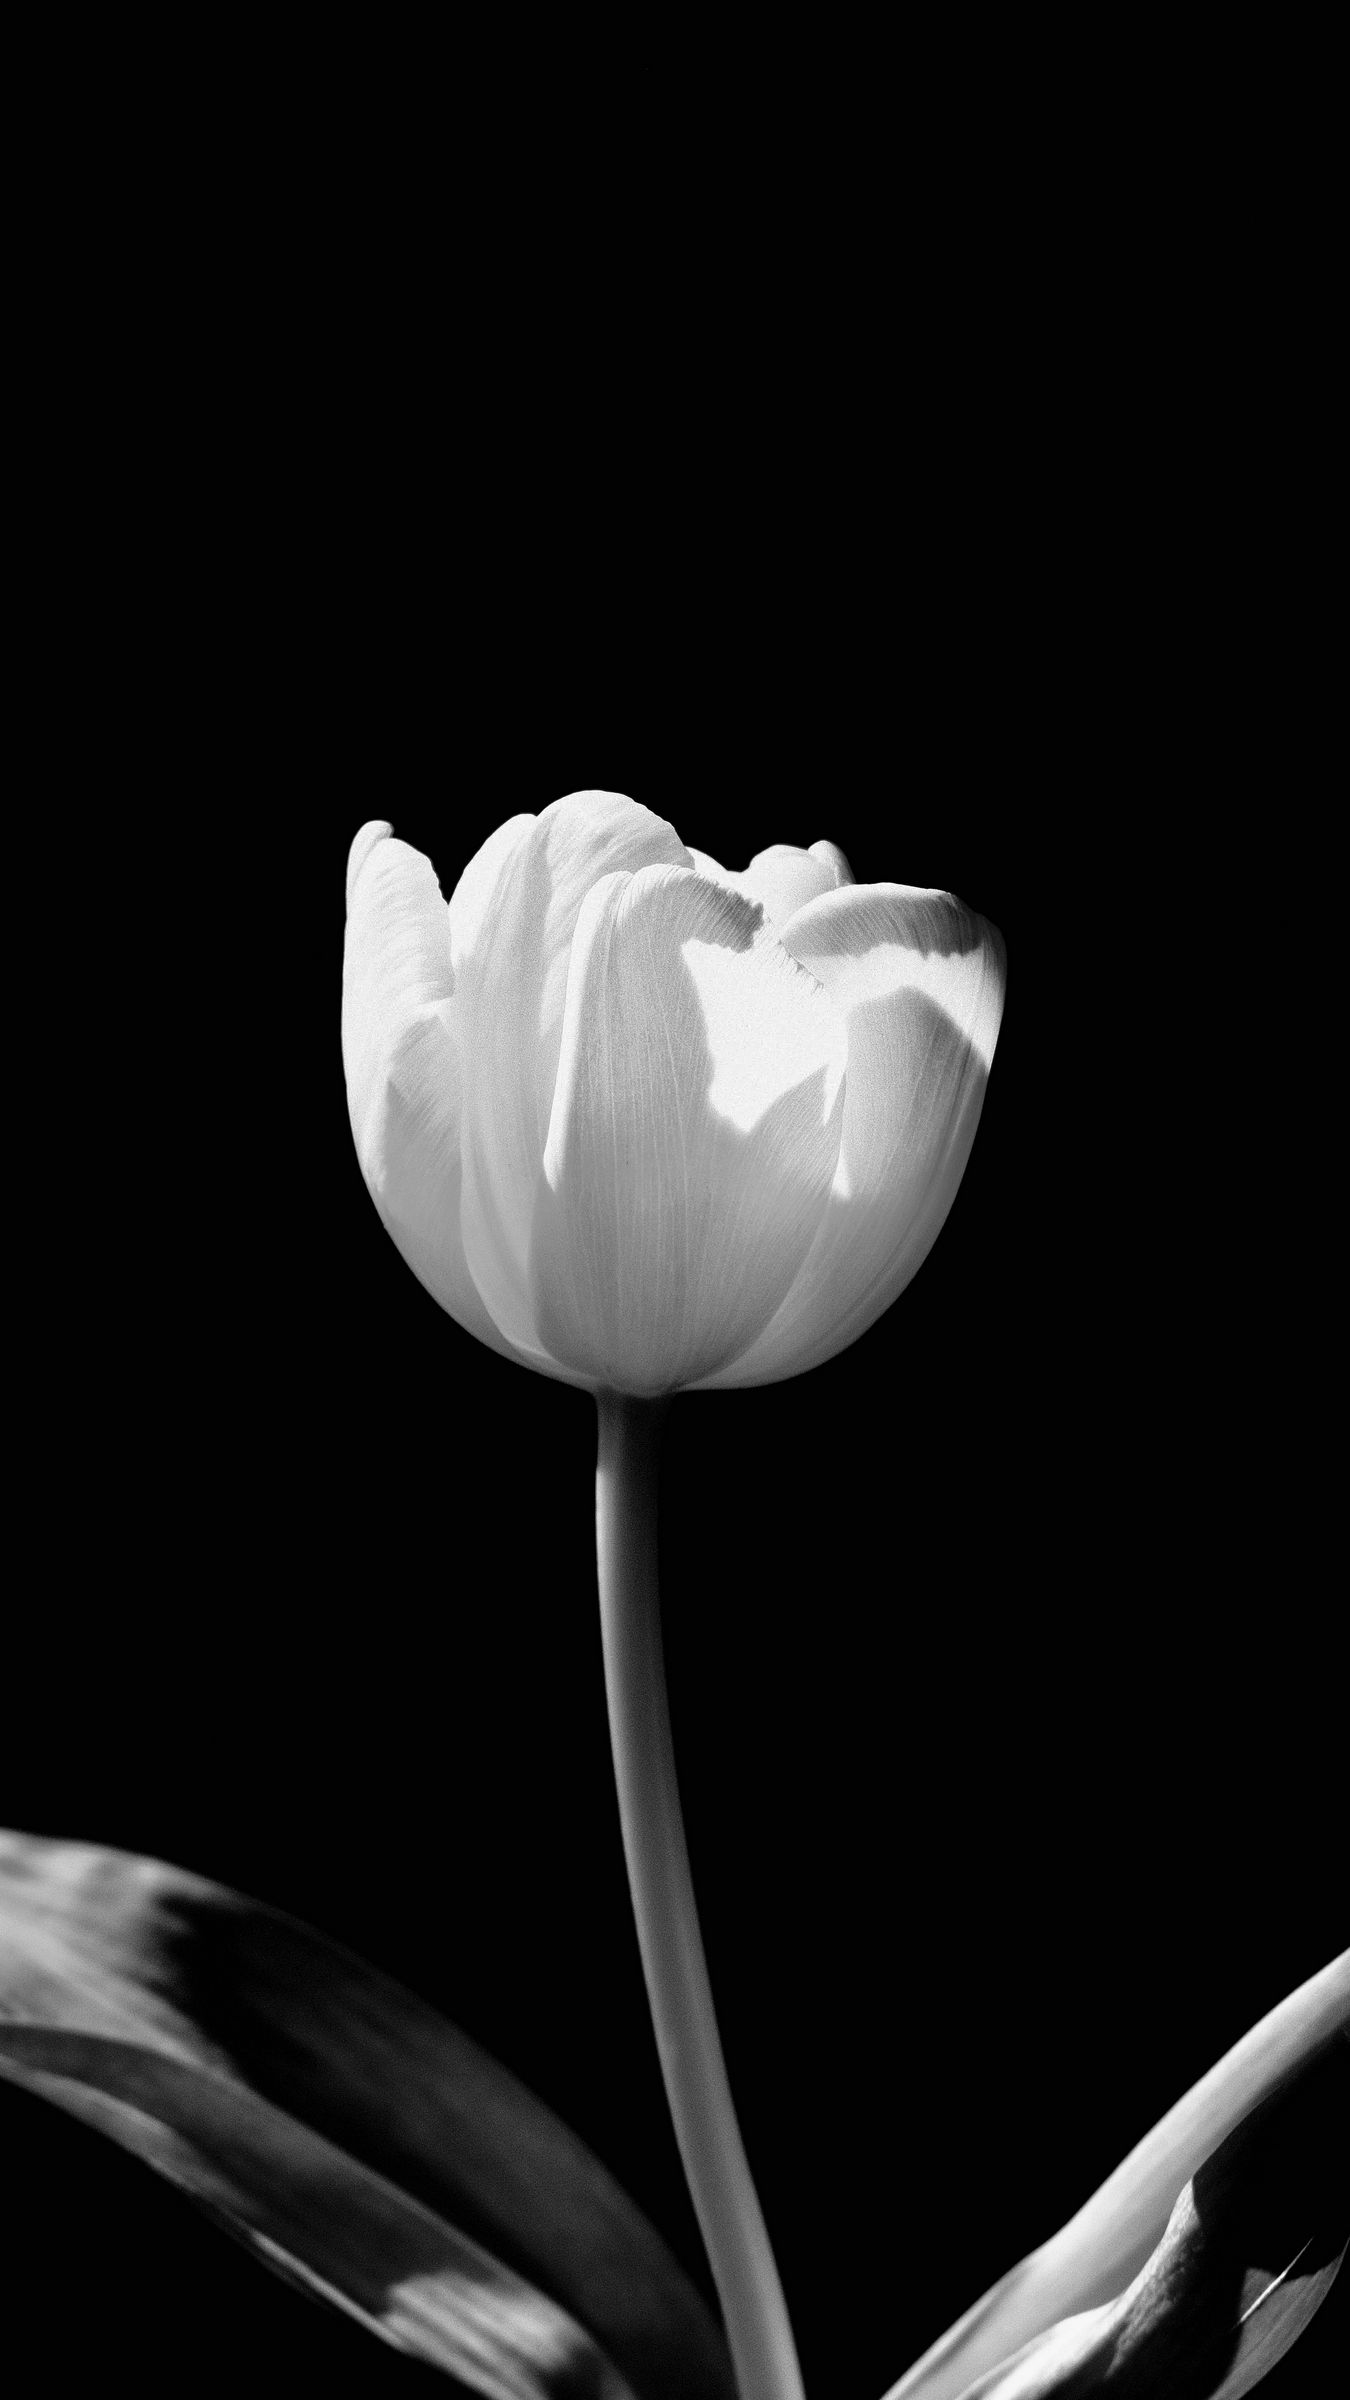 Download wallpaper 1350x2400 tulip, flower, white, bw iphone 8+/7+/6s+/6+  for parallax hd background